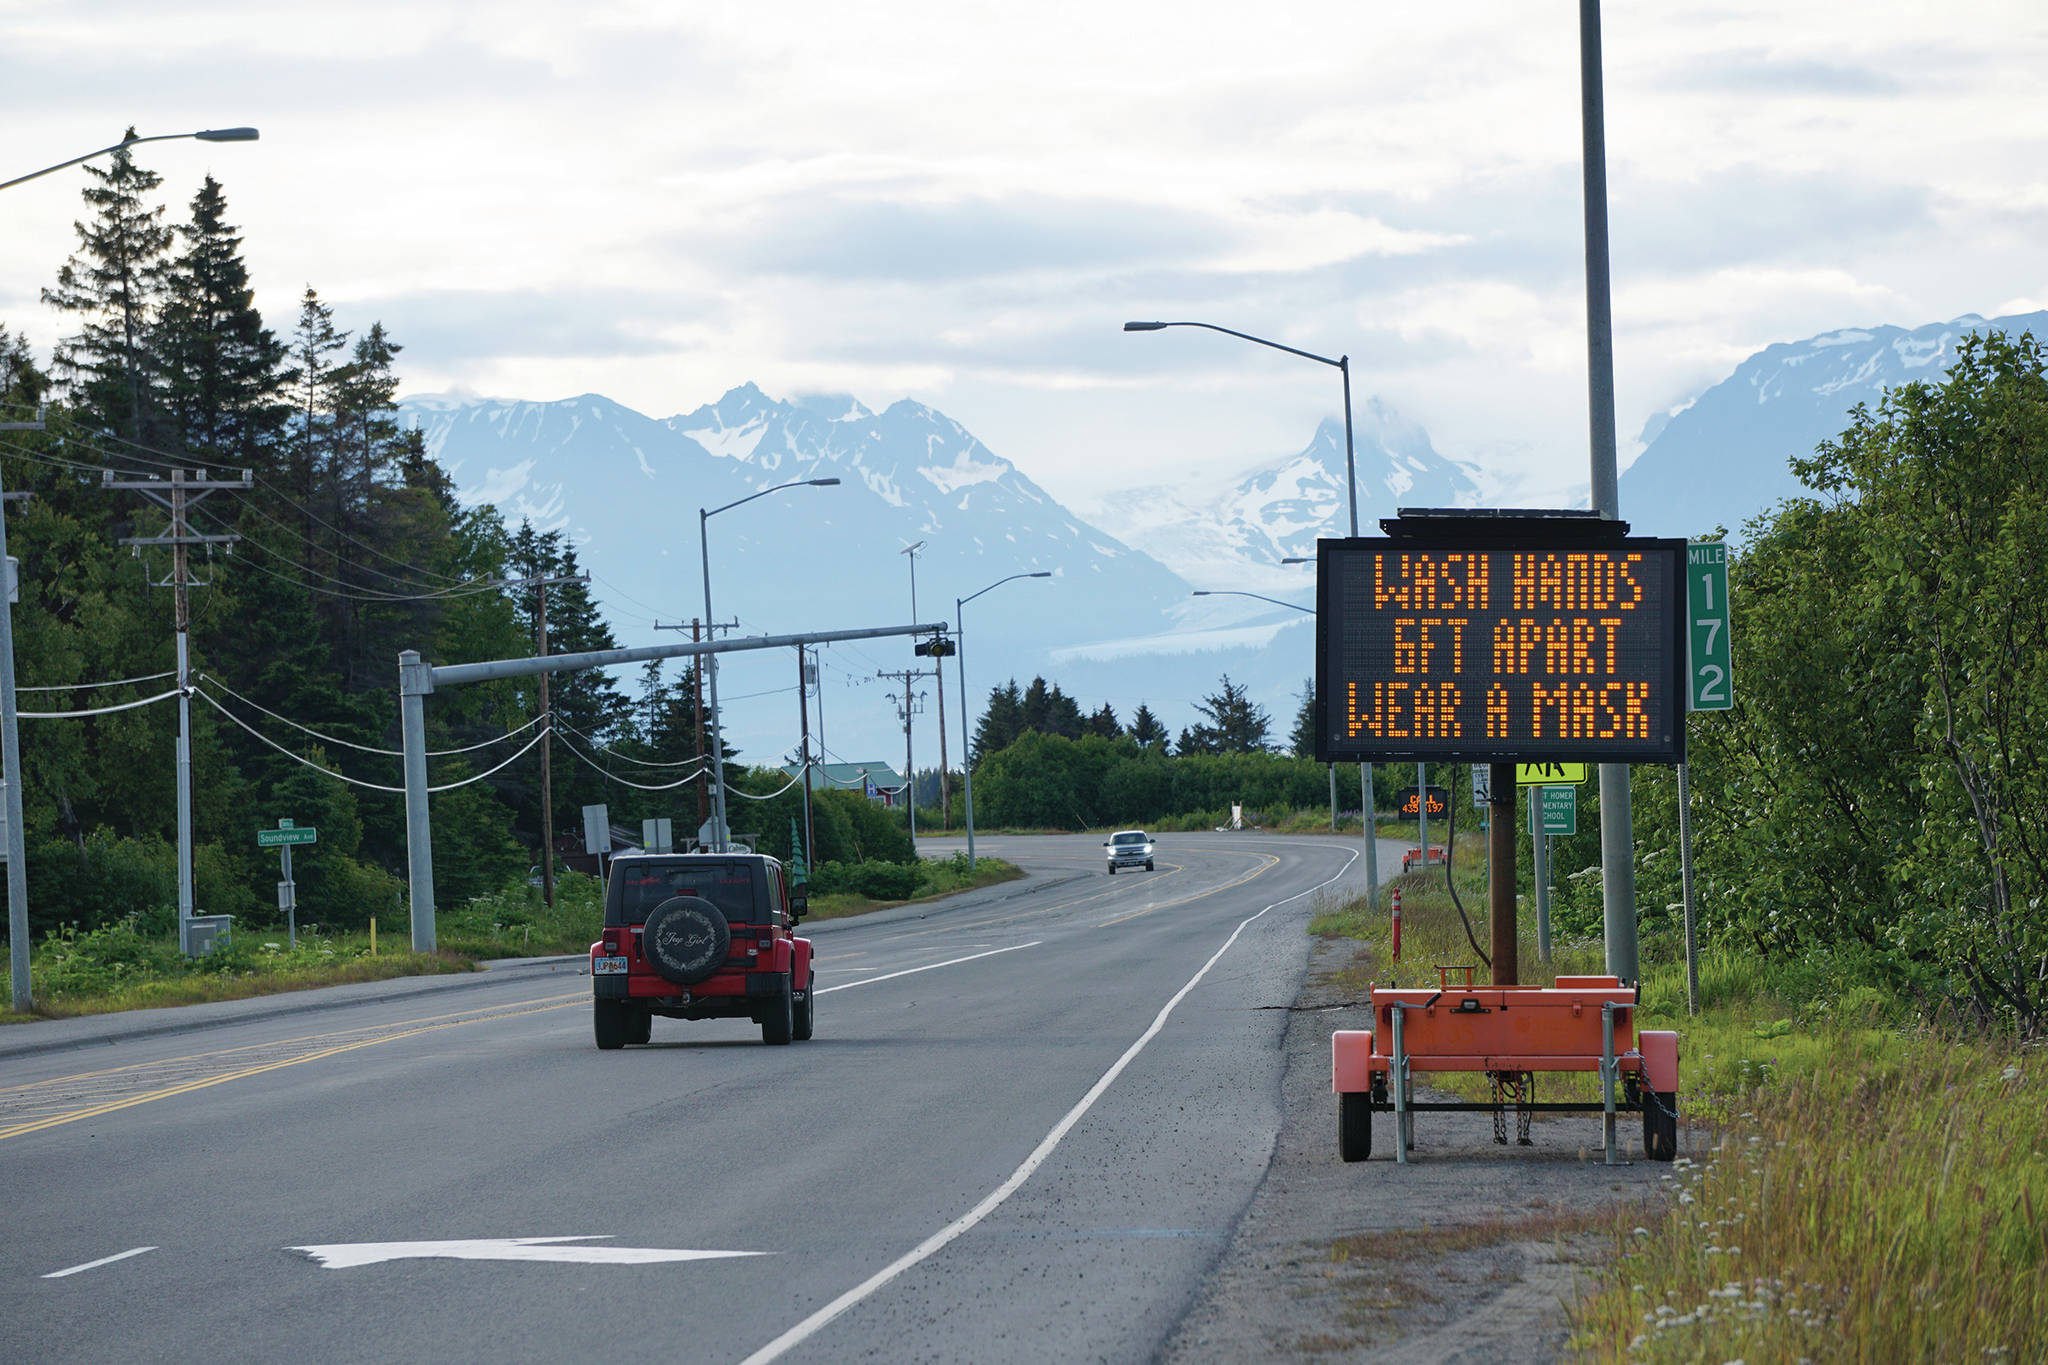 Cars pass the City of Homer advisory signs on Wednesday, June 24, 2020, at Mile 172 Sterling Highway near West Hill Road in Homer, Alaska. The sign also reads “Keep COVID-19 out of Homer.” (Photo by Michael Armstrong/Homer News)